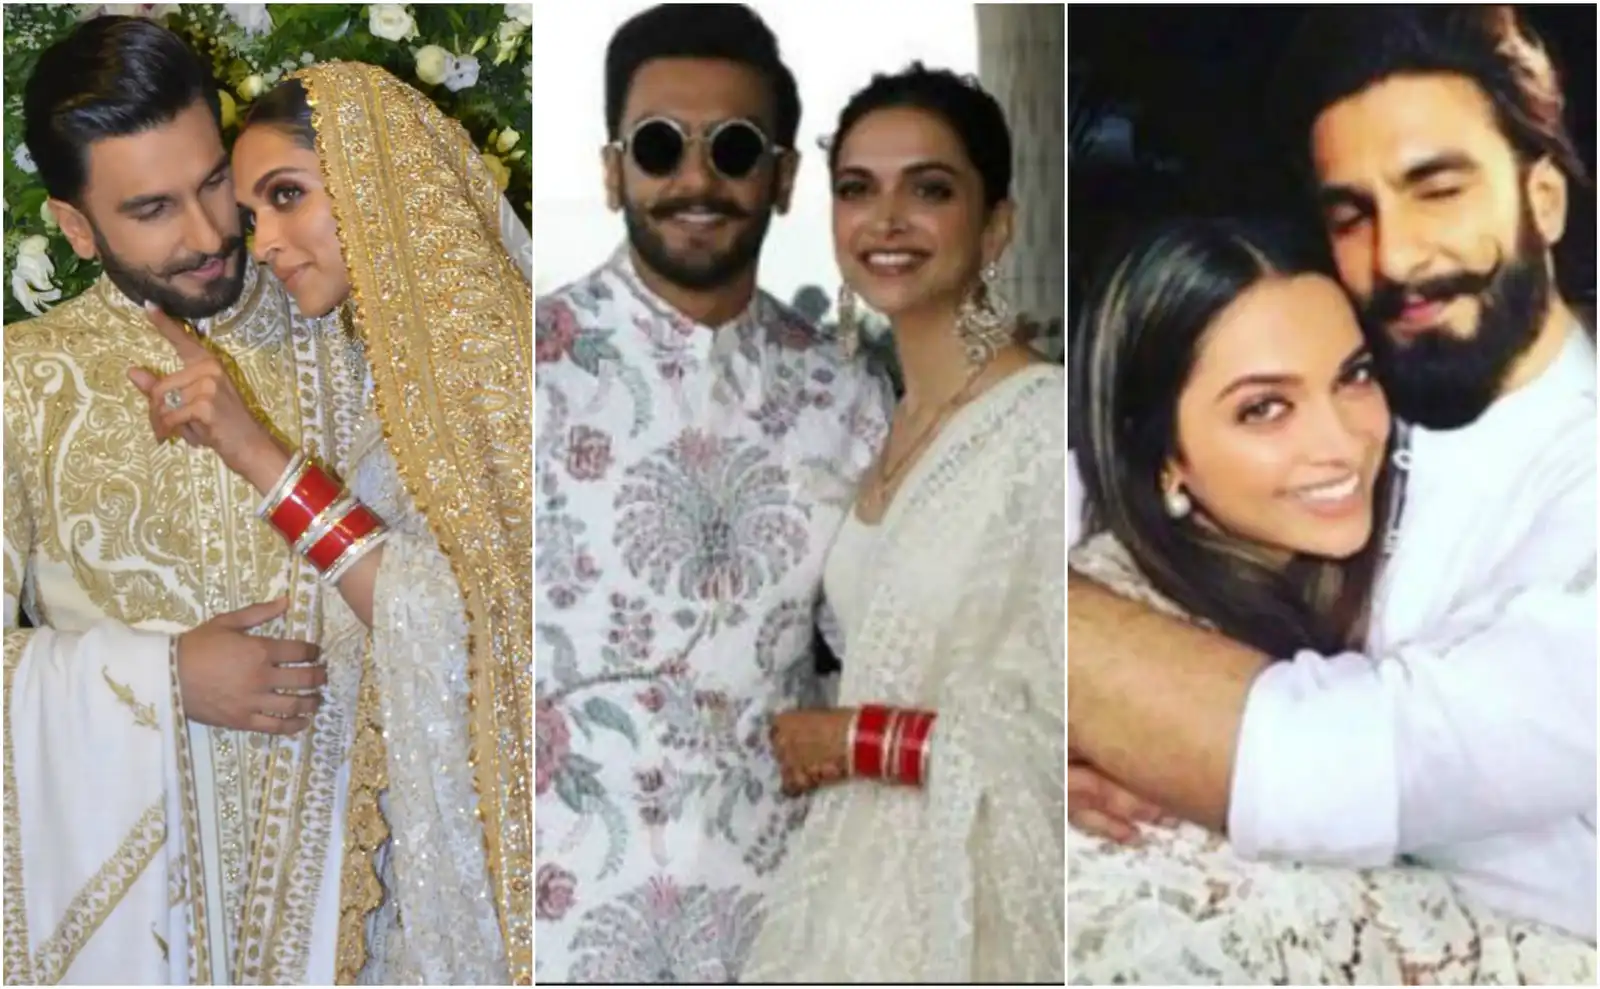 From the Initial Days Of Dating To Their Mumbai Reception, Twinning In White Has Been A Constant For DeepVeer